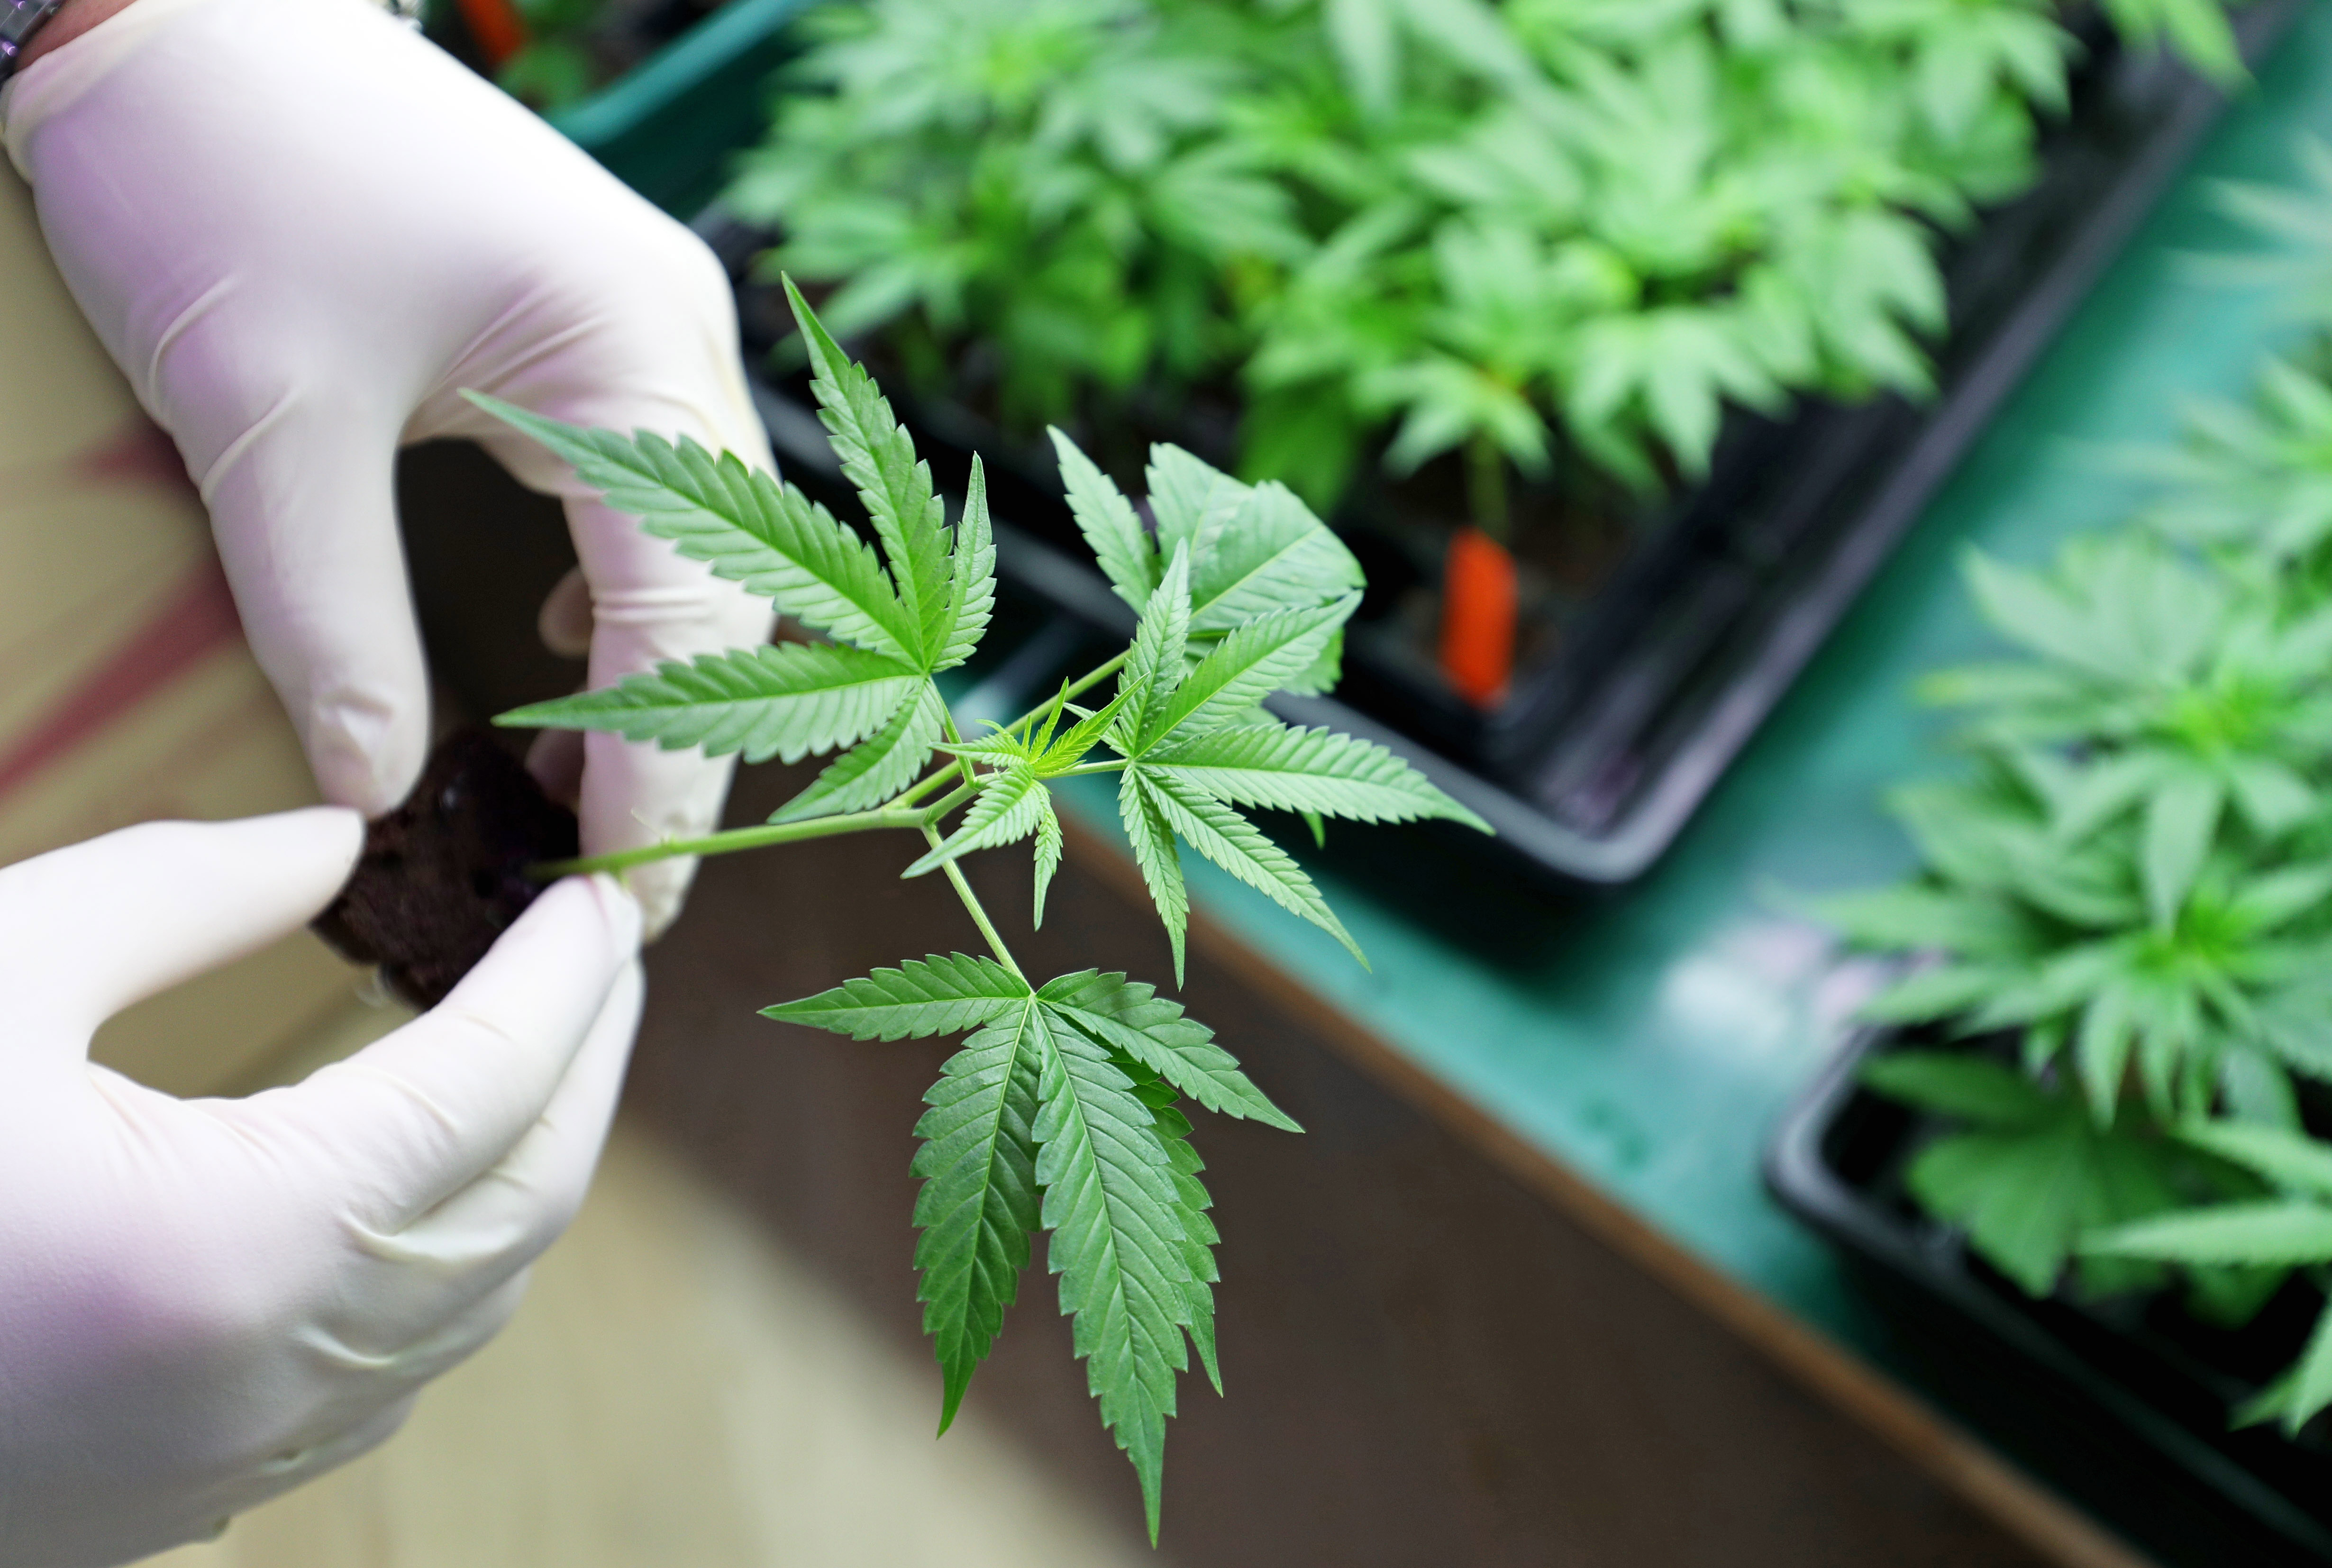 A cannabis plant being handled by a technician on a growing floor